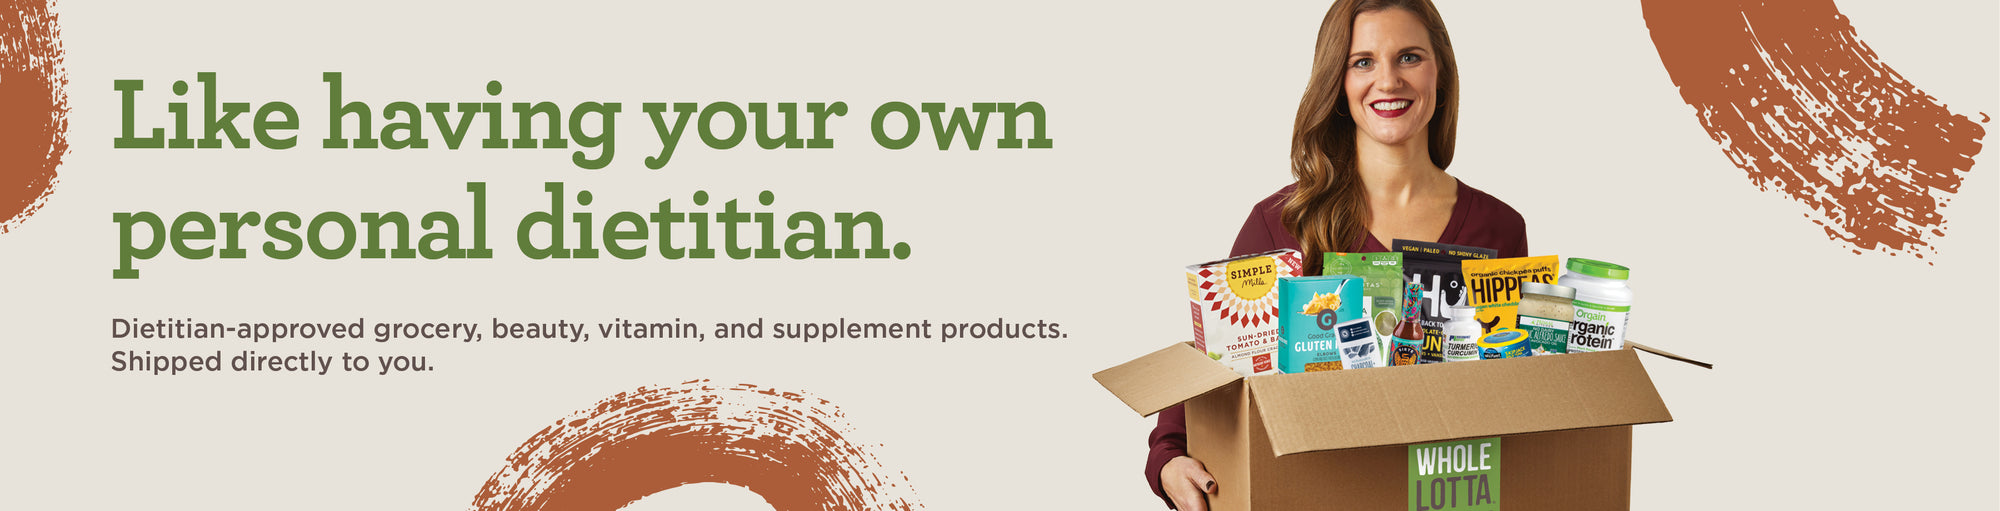 Dietitian approved grocery, beauty, vitamin and supplement products. Shipped directly to you. 